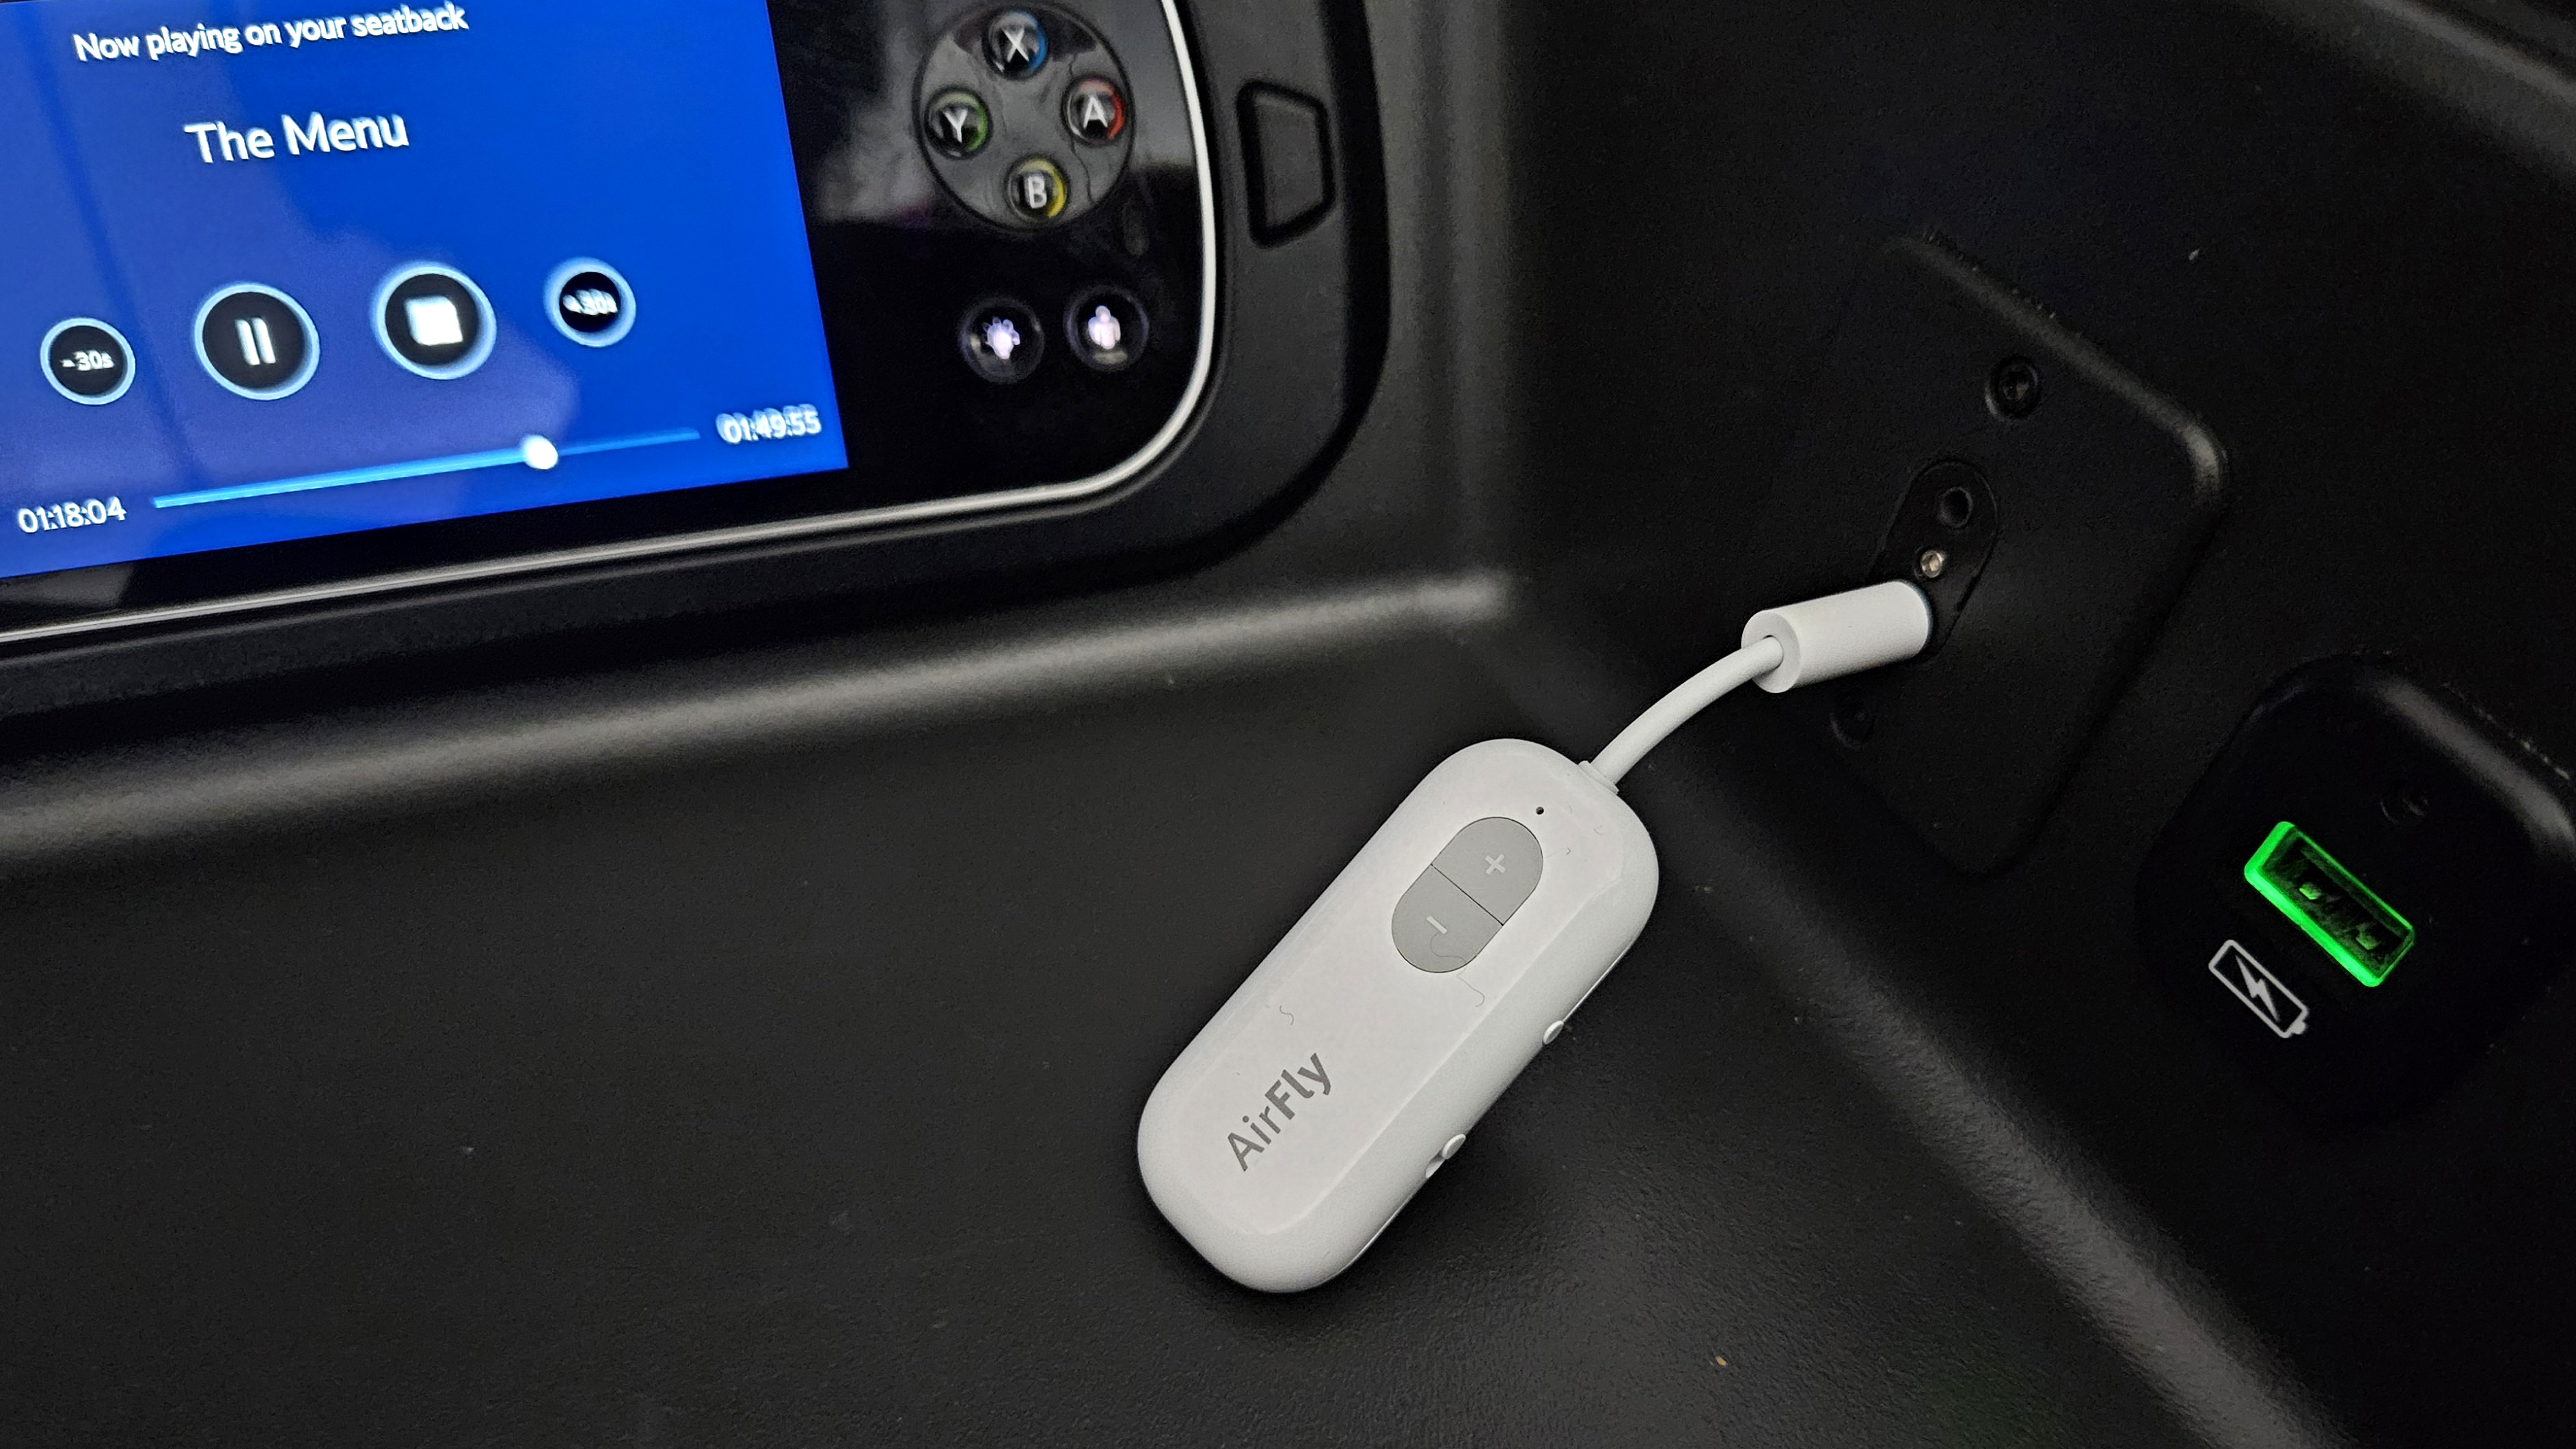 Airfly Pro Review: Taking Flight with your Airpods! 